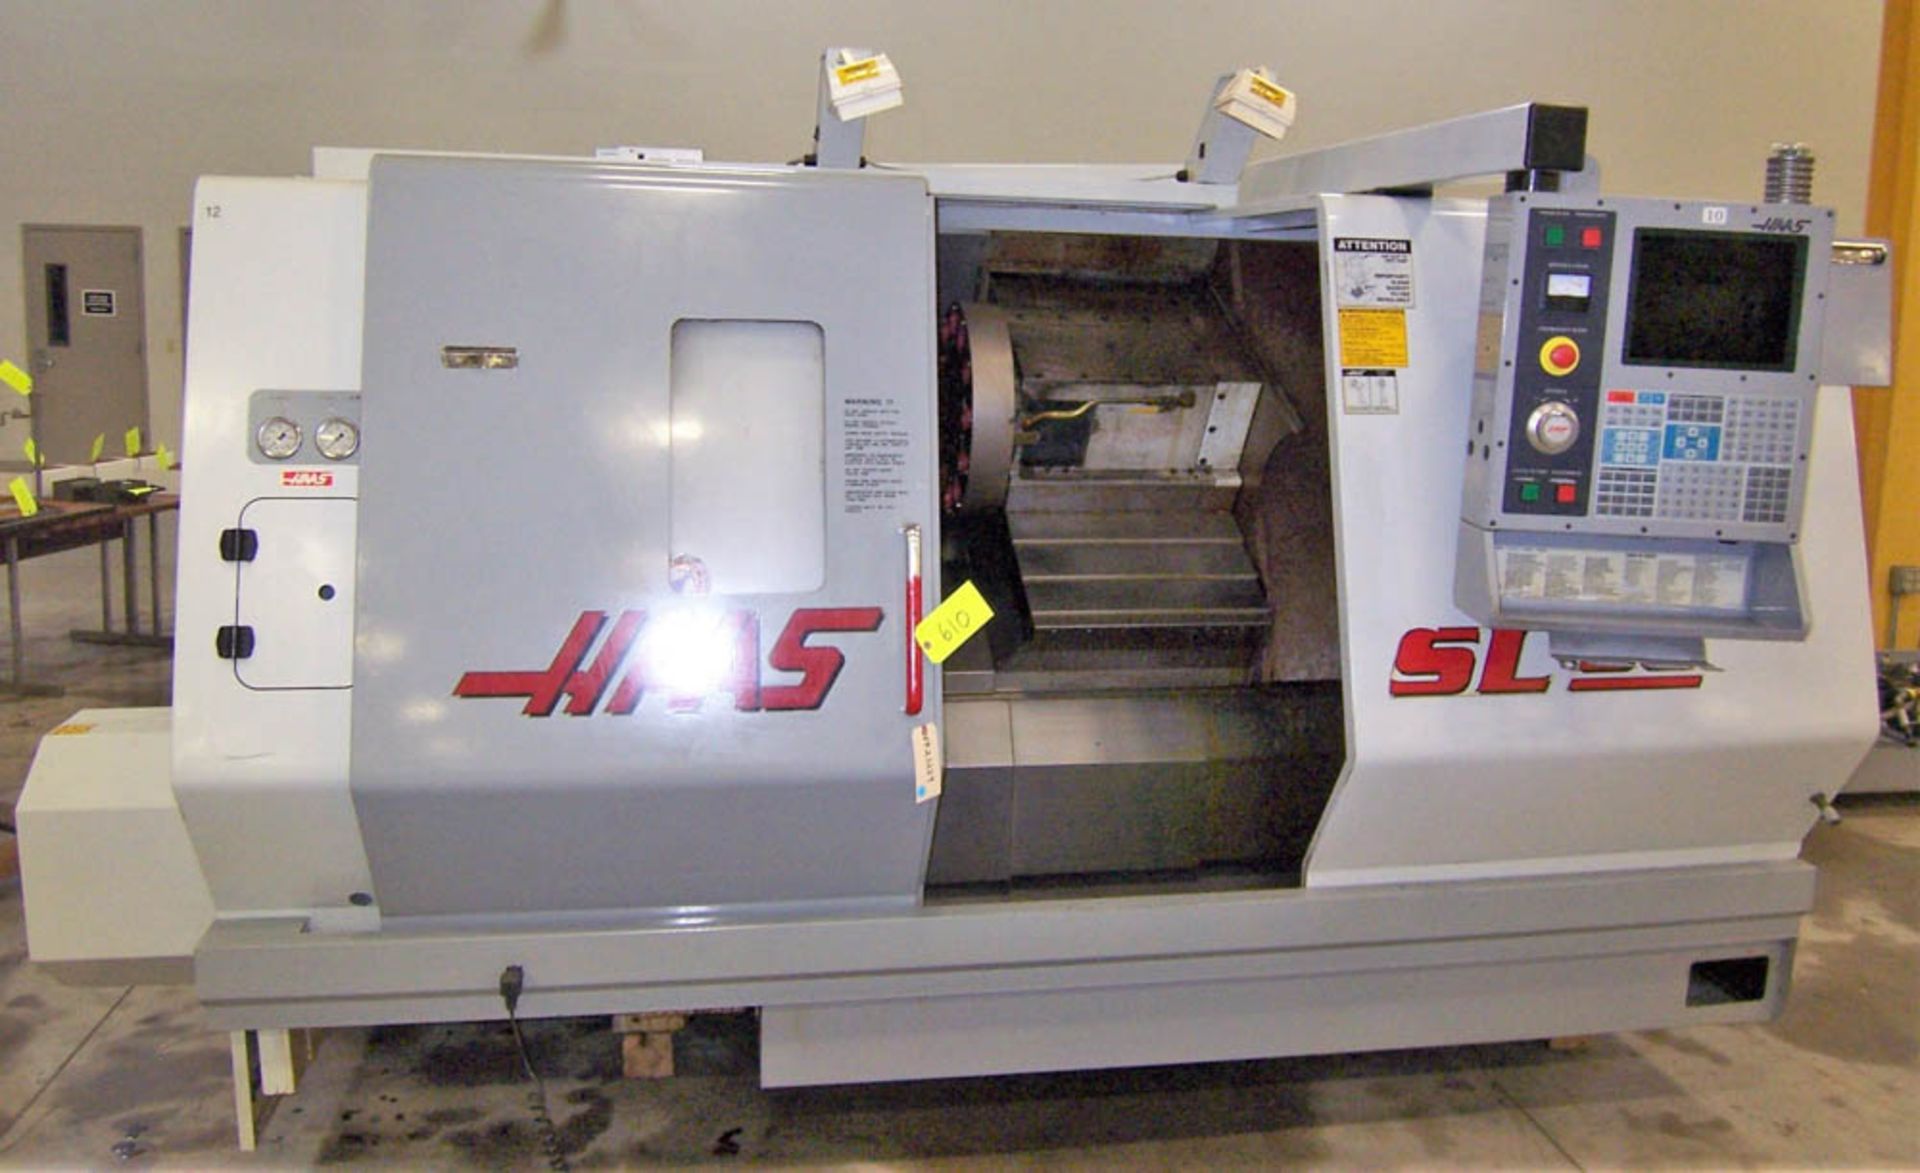 HAAS MDL. SL-30T CNC LATHE WITH HAAS CONTROL, 10" CHUCK, SWING DIAMETER: OVER FRONT APRON: 30", OVER